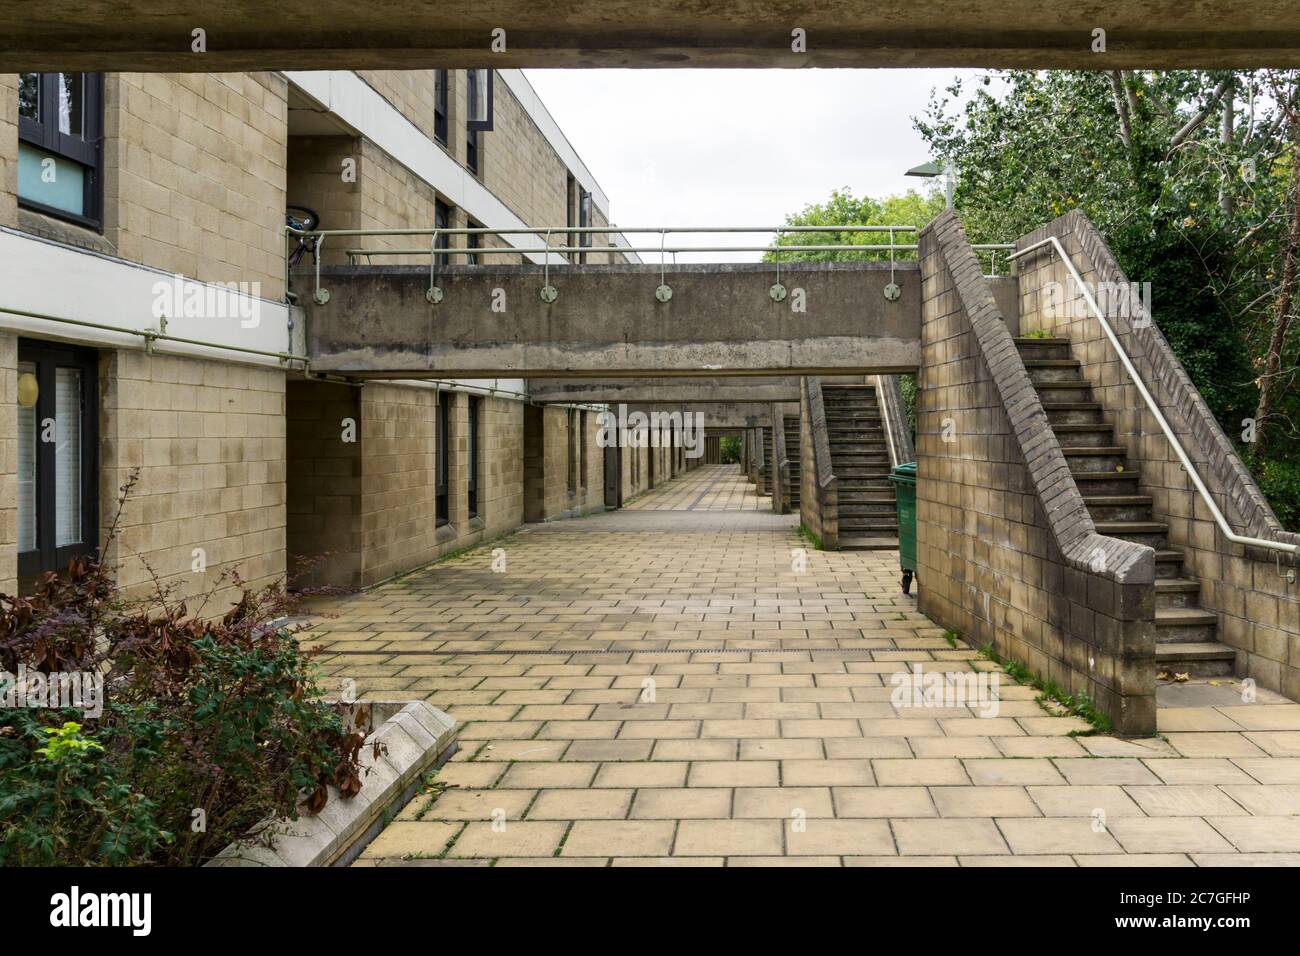 Stairway access to rear of flats on Whittington Estate, Camden, North London, designed by Peter Tabori under Camden Borough Architect, Sydney Cook. Stock Photo